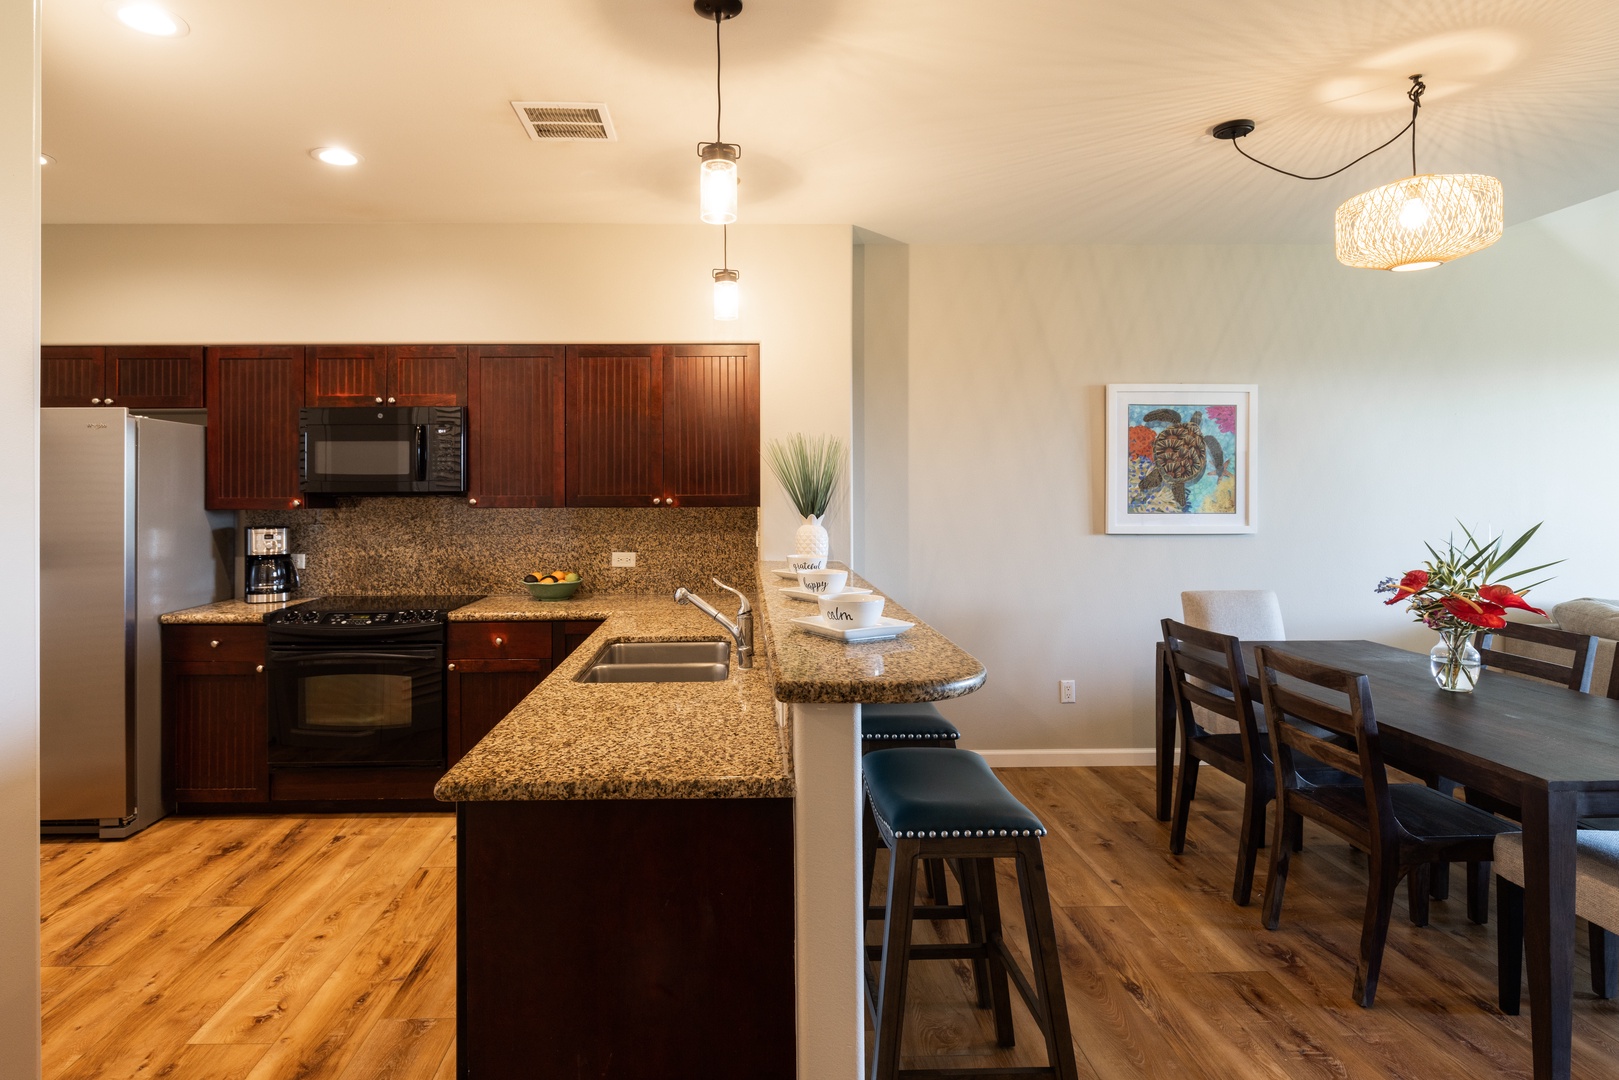 Waikoloa Vacation Rentals, Fairway Villas at Waikoloa Beach Resort E34 - The kitchen is well stocked and allows the chef to engage with everyone